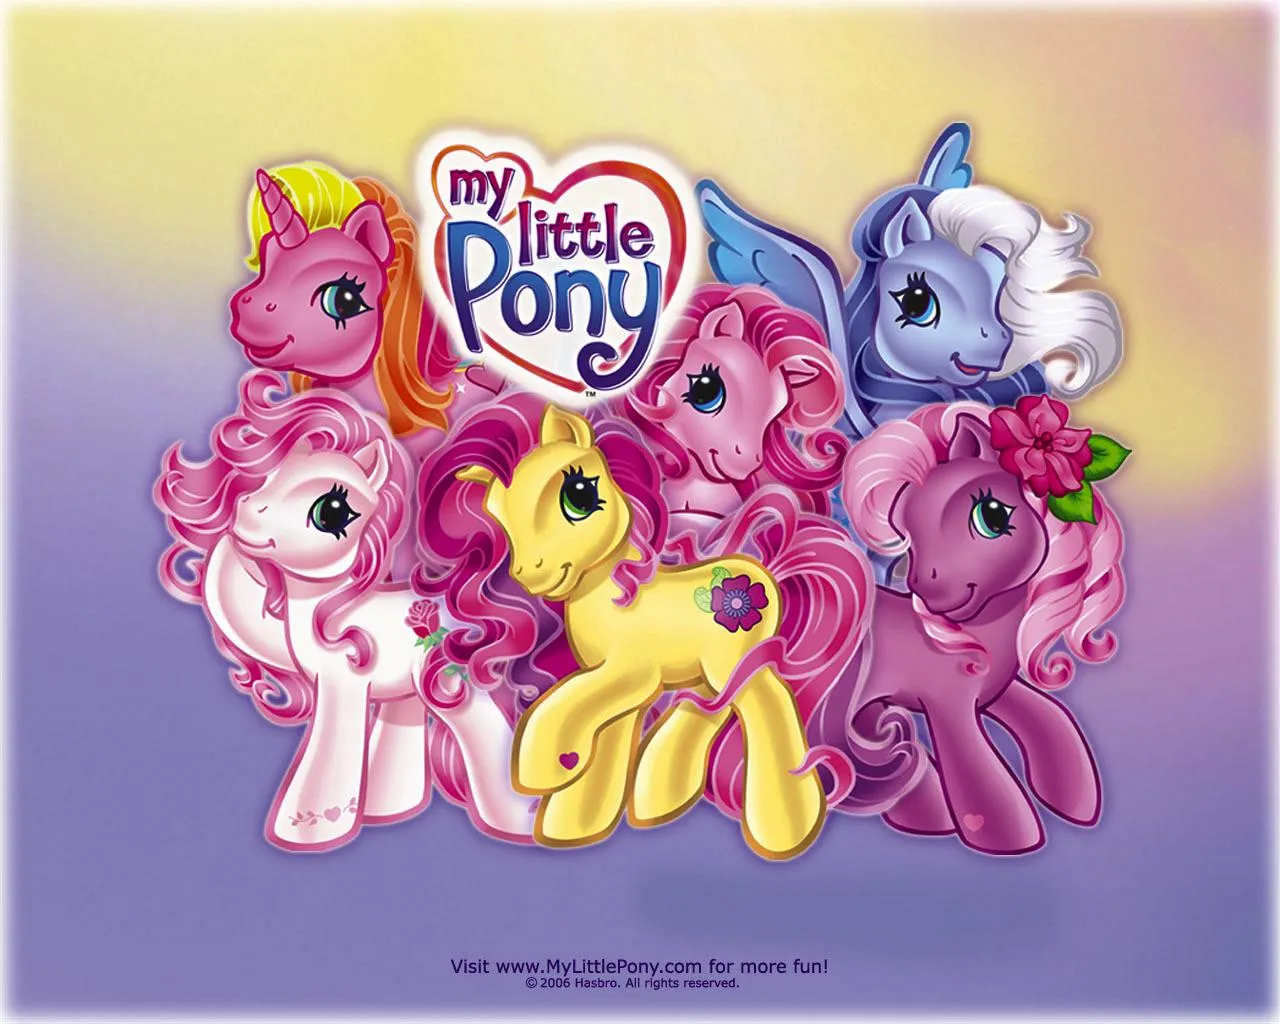 MY LITTLE PONY | I MISS THE OLD SCHOOL